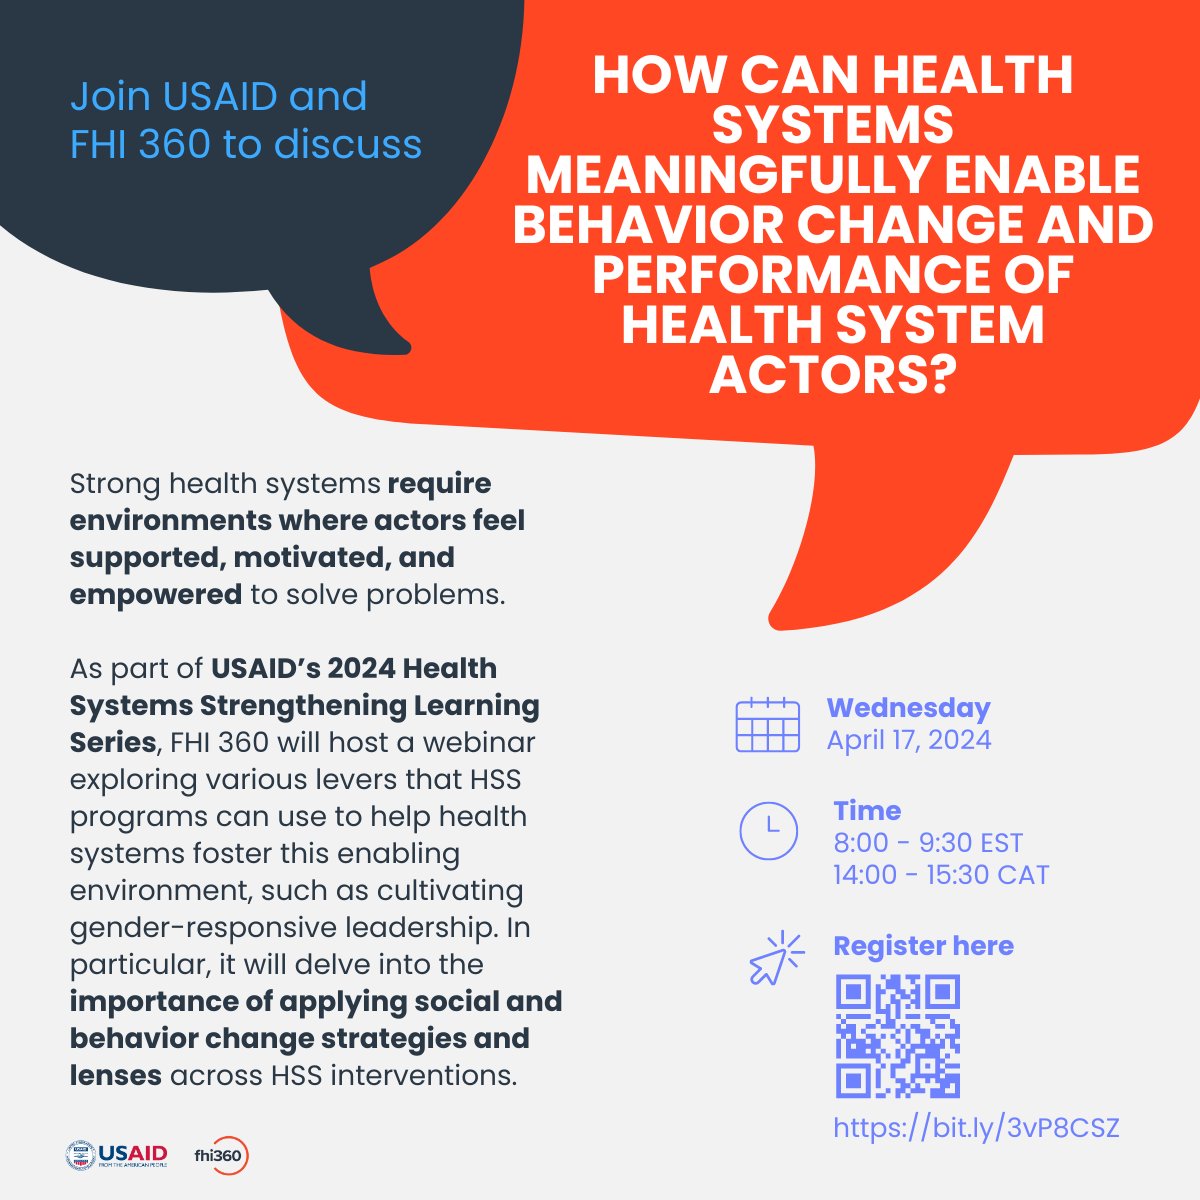 Strong #HealthSystems require environments where actors feel supported, motivated, & empowered to solve problems. Join us & @FHI360 on April 17 to learn how health systems can enable behavior change & performance of health system actors! Register now: ow.ly/oiBl50RbjW3